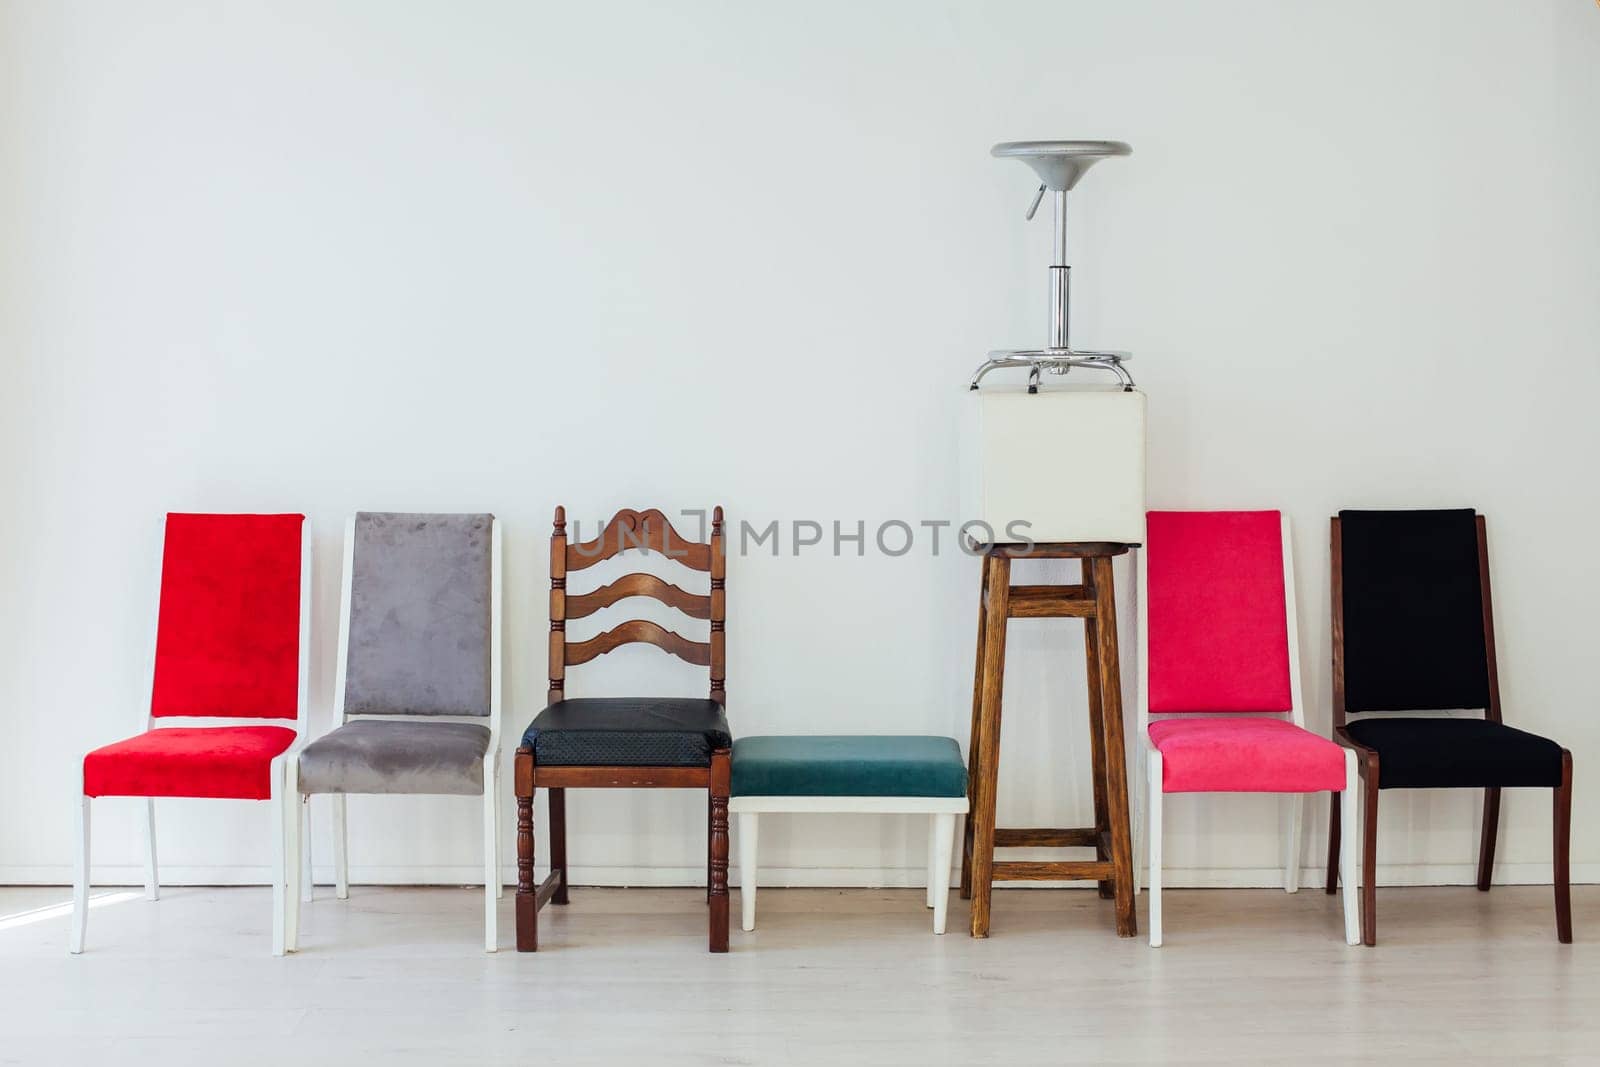 lots of different chairs in the interior of an empty white room by Simakov